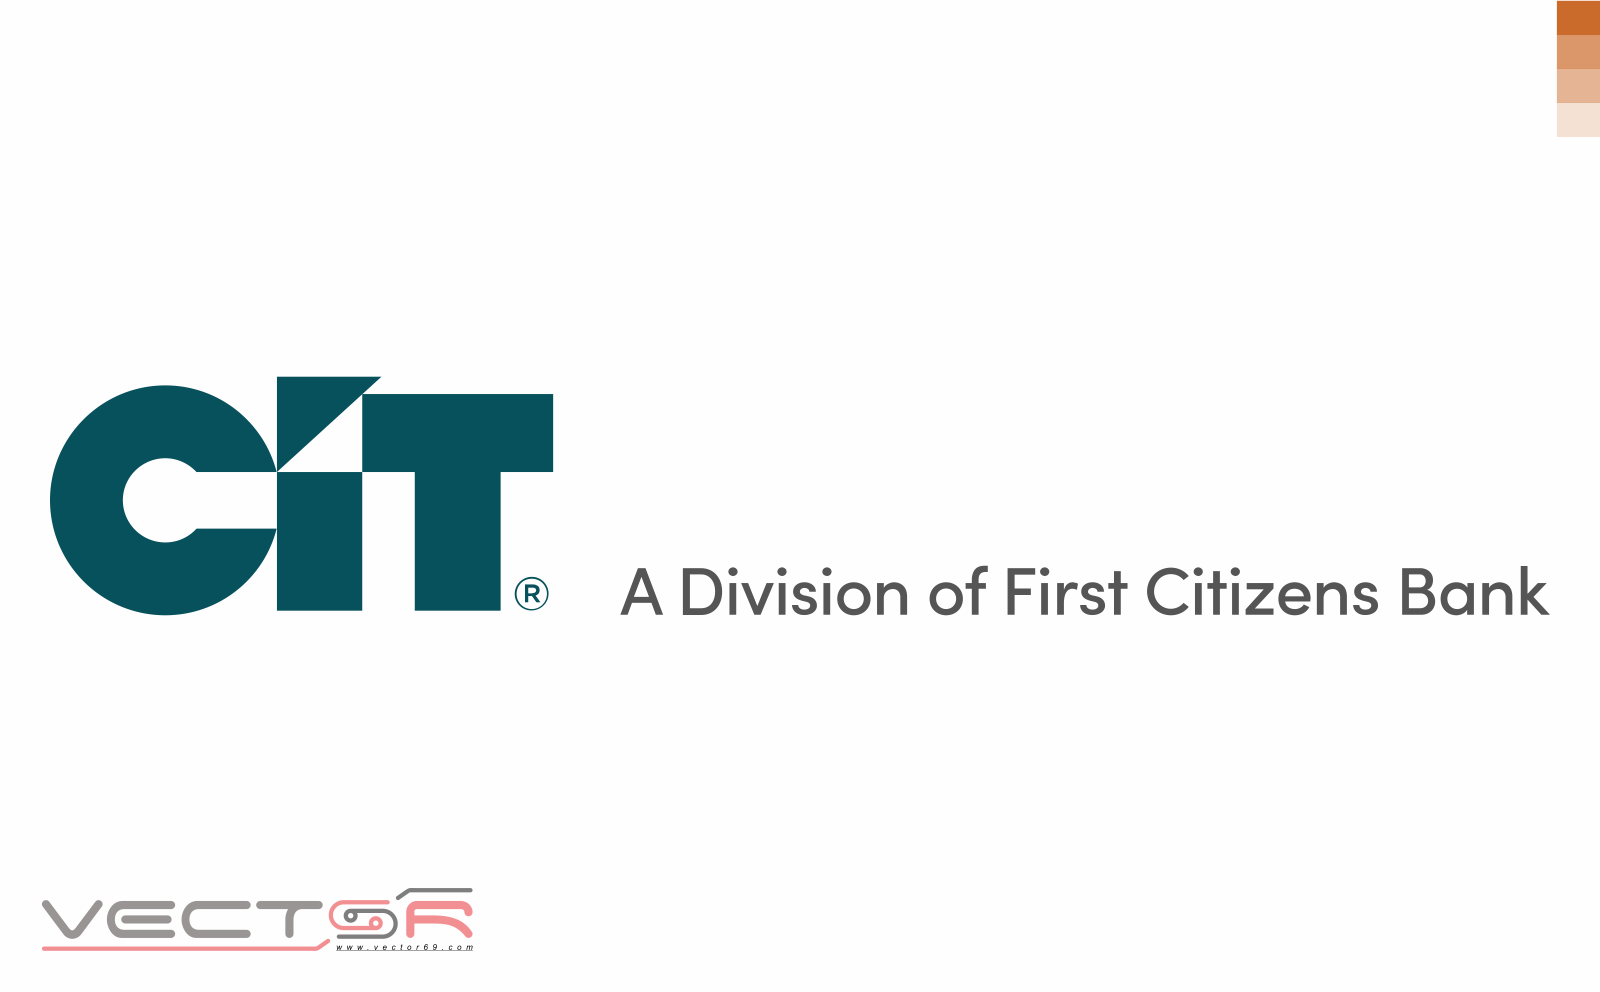 CIT - A Division of First Citizens Bank Logo - Download Vector File AI (Adobe Illustrator)